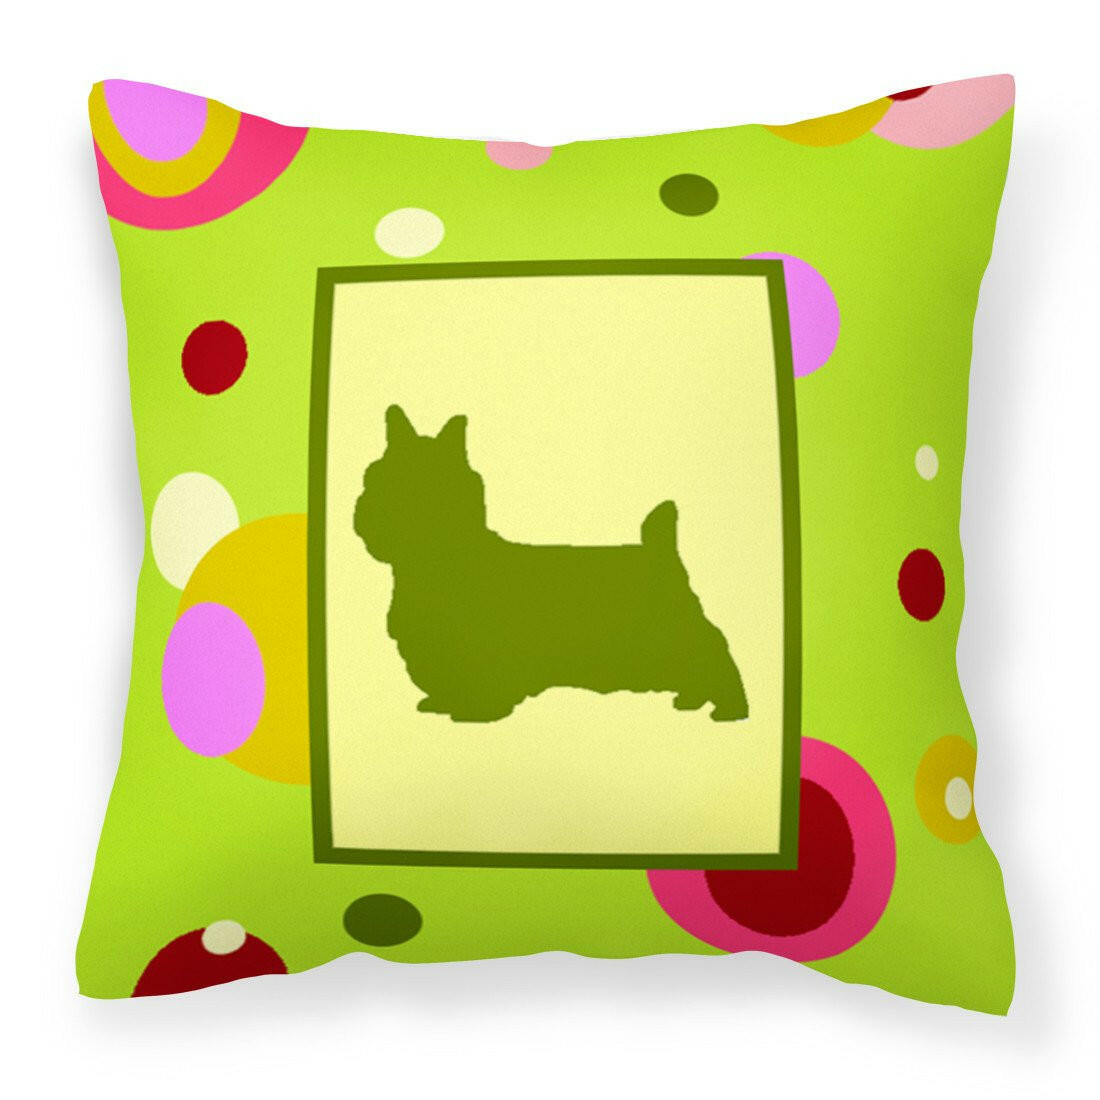 Lime Green Dots Norwich Terrier Fabric Decorative Pillow CK1056PW1414 by Caroline's Treasures